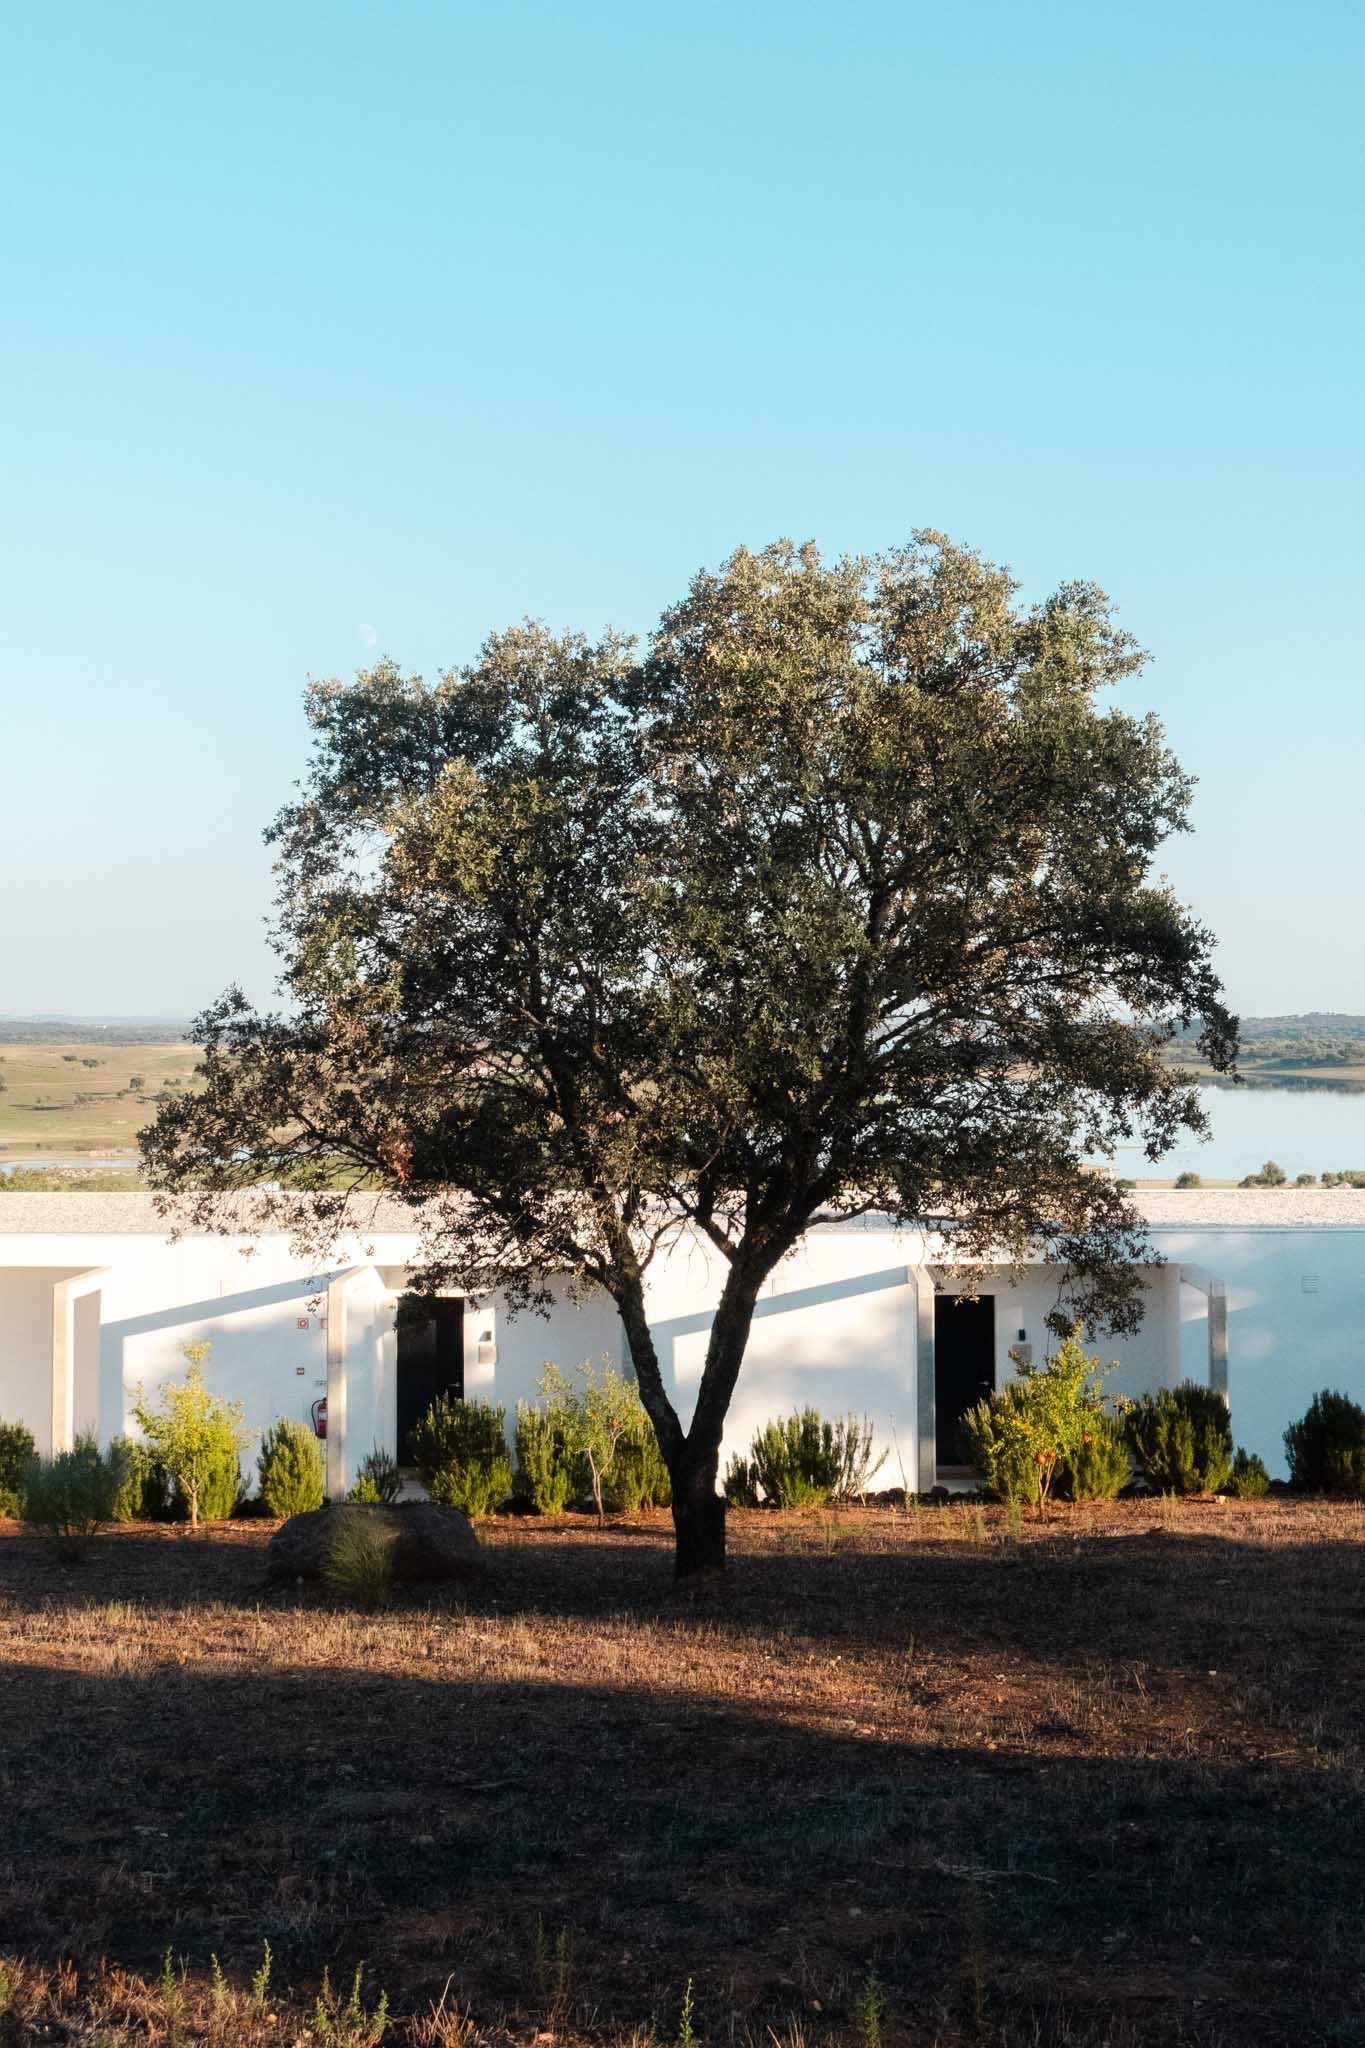 Alentejo Architecture Montimerso Hotel - Montimerso SkyScape Country House - Eco Friendly Hotel in Alentejo Portugal - The Wildest Road Blog.jpg